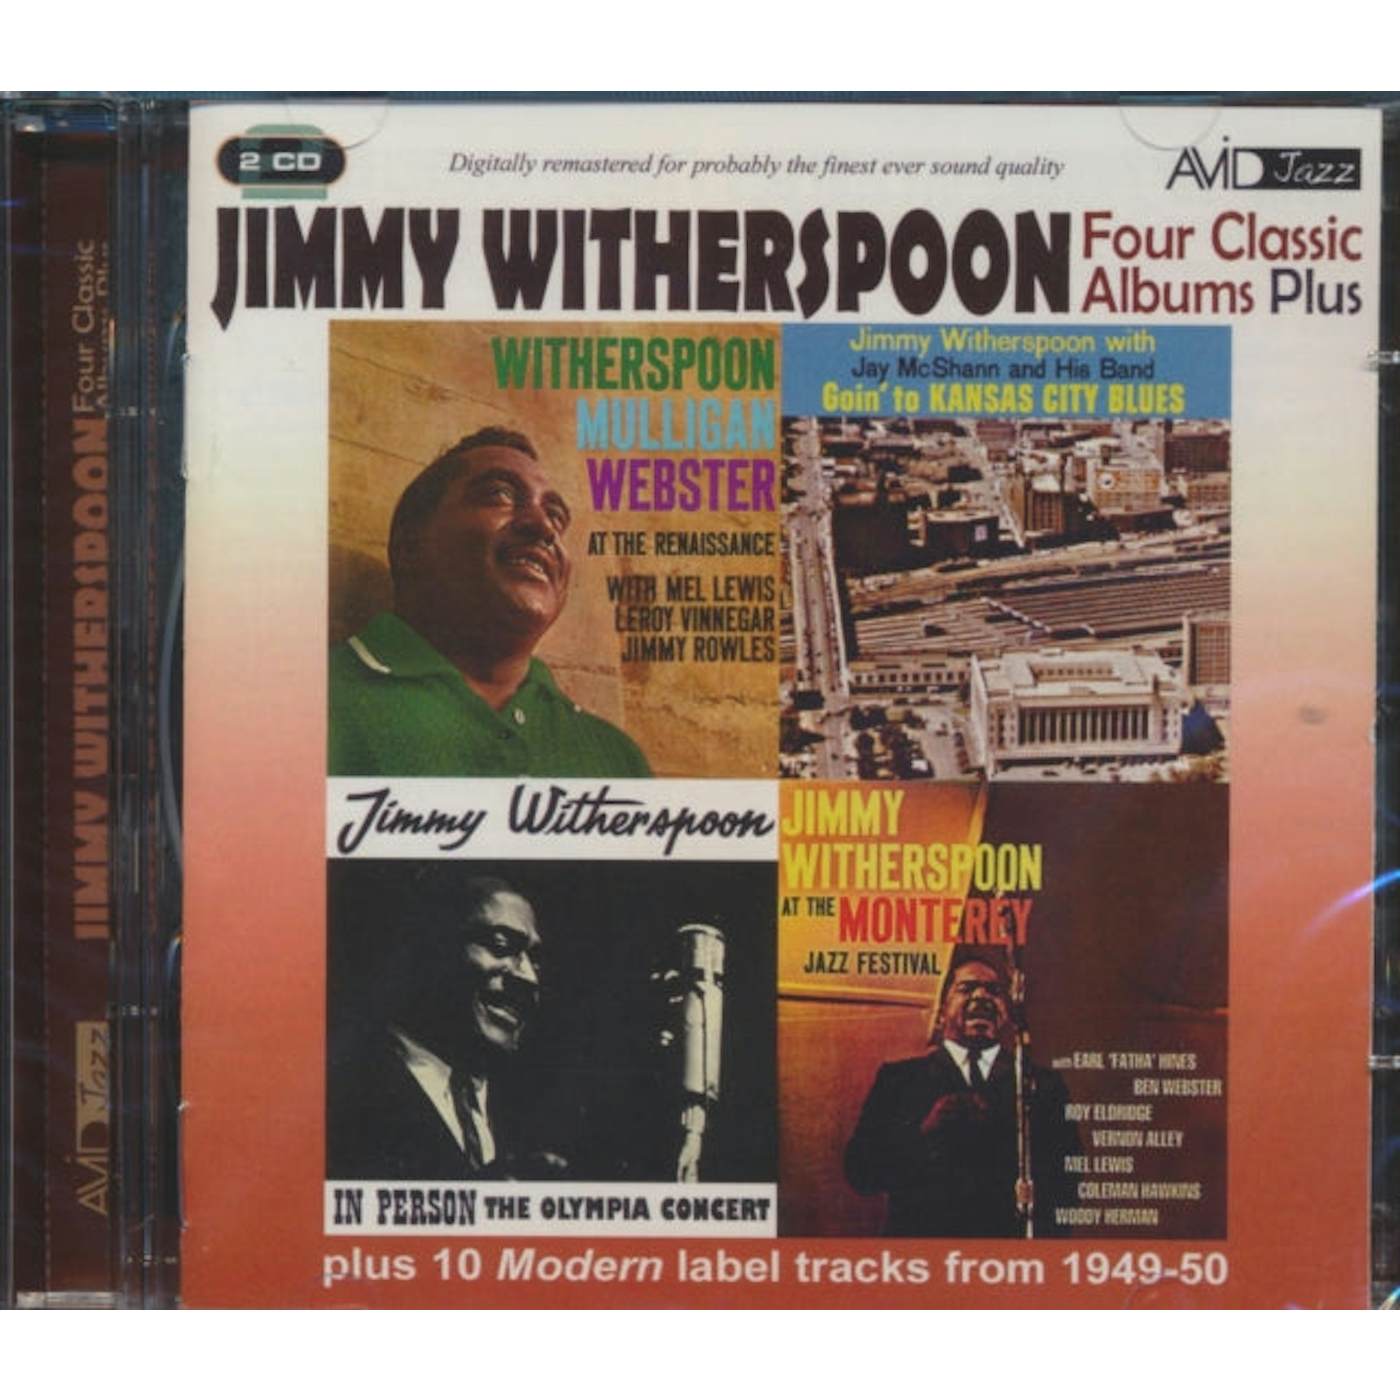 Jimmy Witherspoon CD - Four Classic Albums Plus (Goin' To Kansas City Blues / Witherspoon Mulligan Webster At The Renaissance / Jimmy Witherspoon At Monterey / In Person (Olympia Concert)